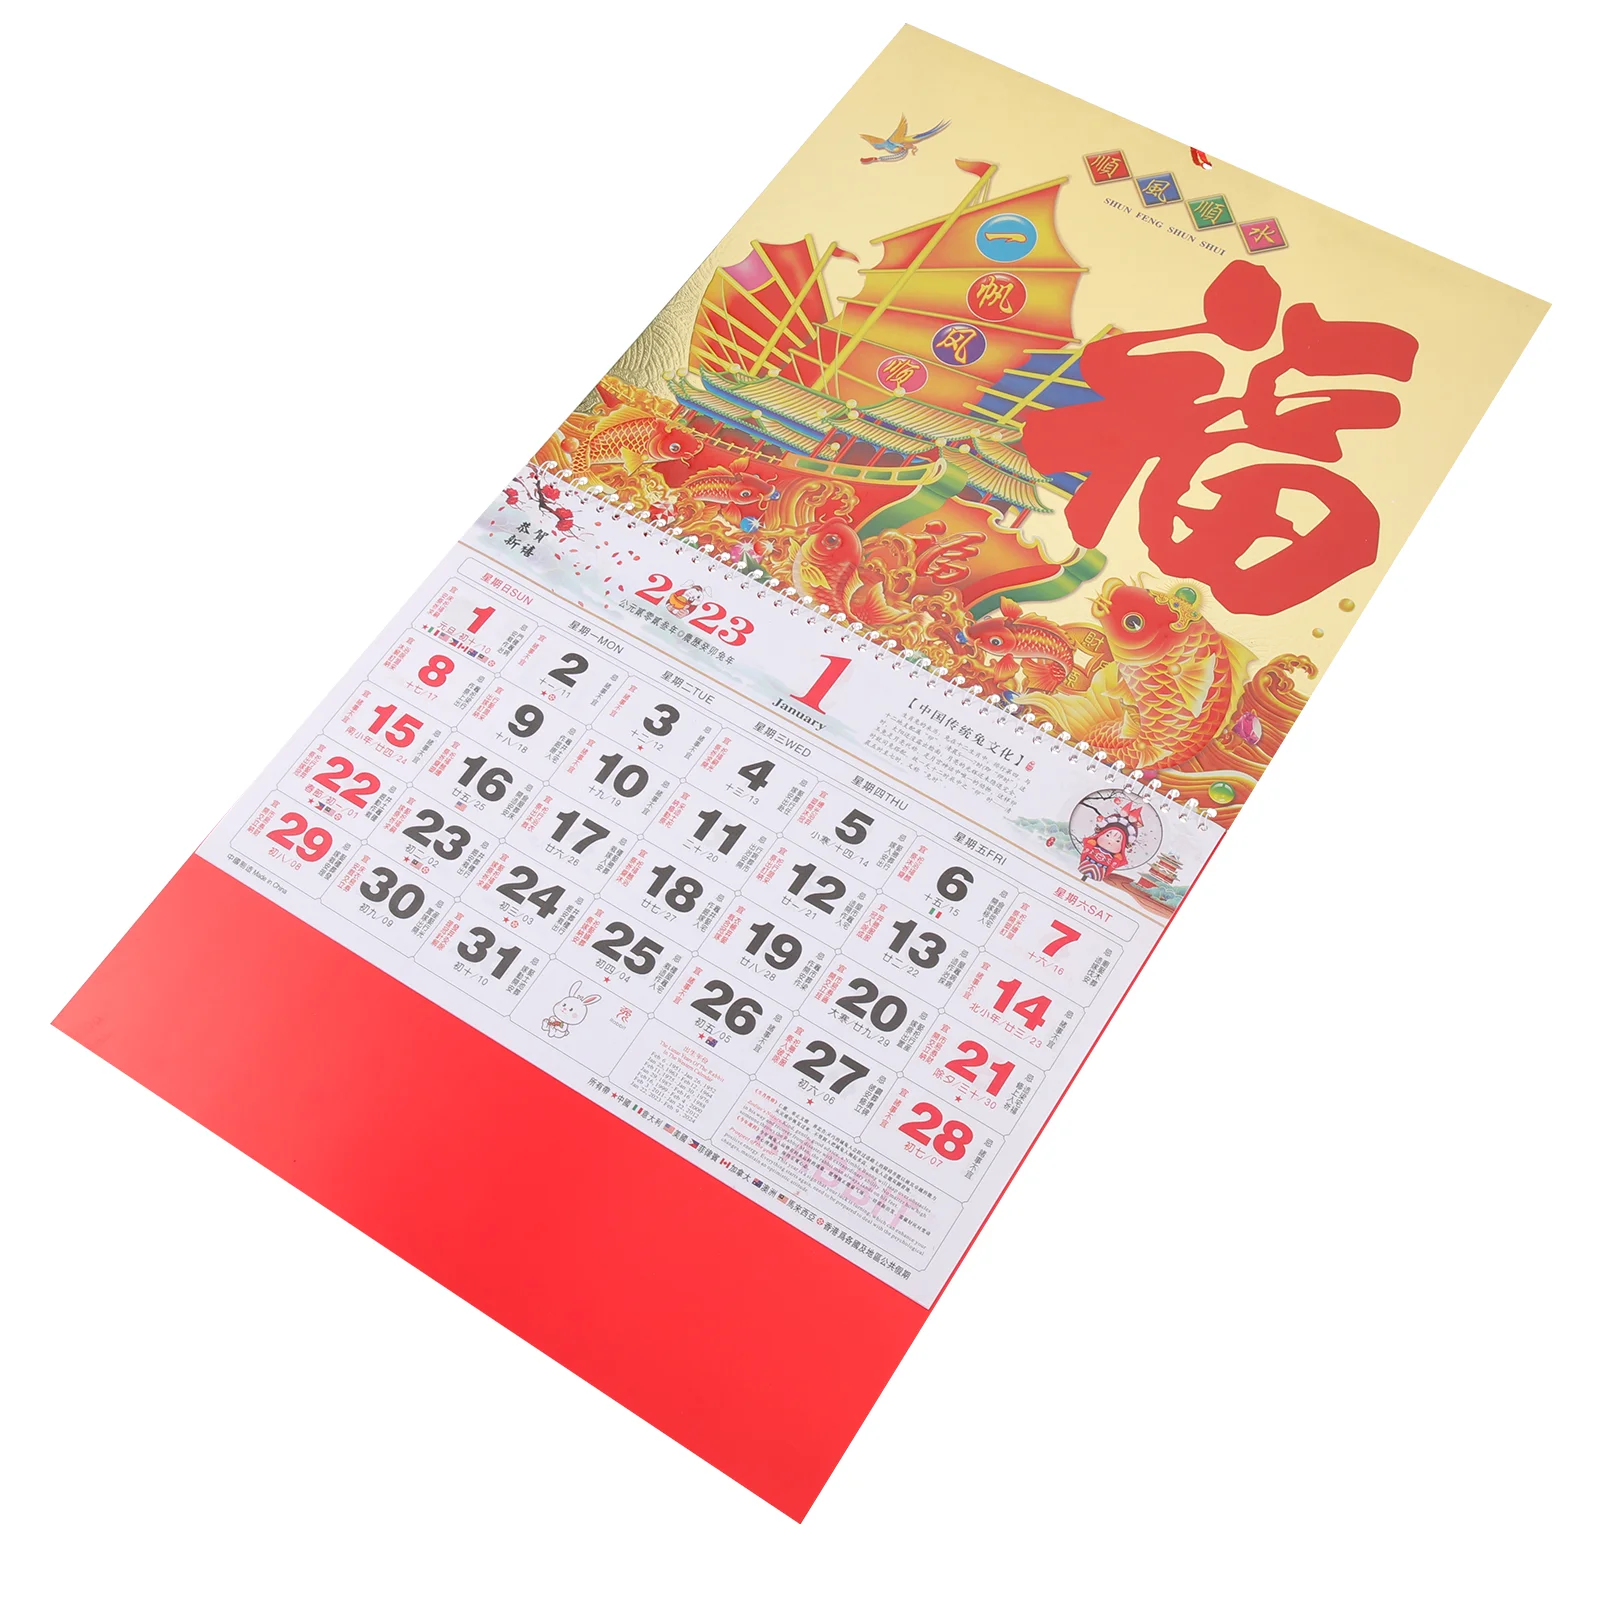 

Calendar Chinese Year Wall Rabbit New Lunar Monthly Hangingthe Daily Calendars Traditionalfestival Spring Planner Zodiac